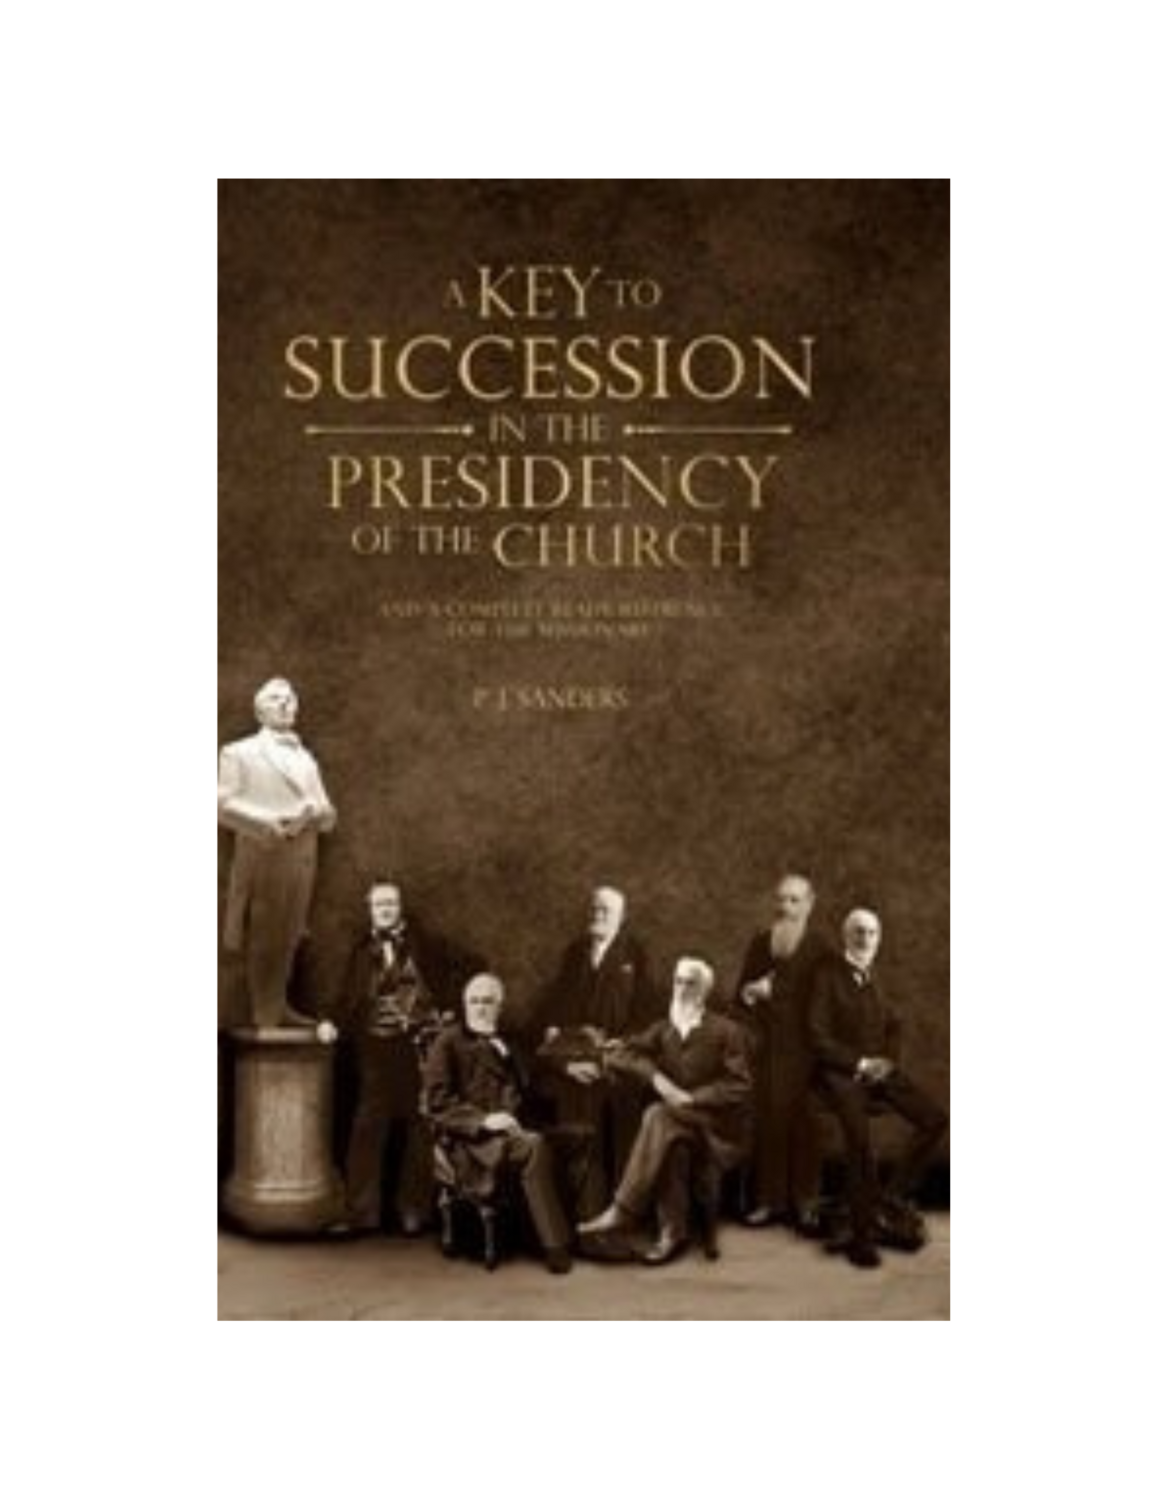 Key to Succession in the Presidency/Missionary Reference (1909)